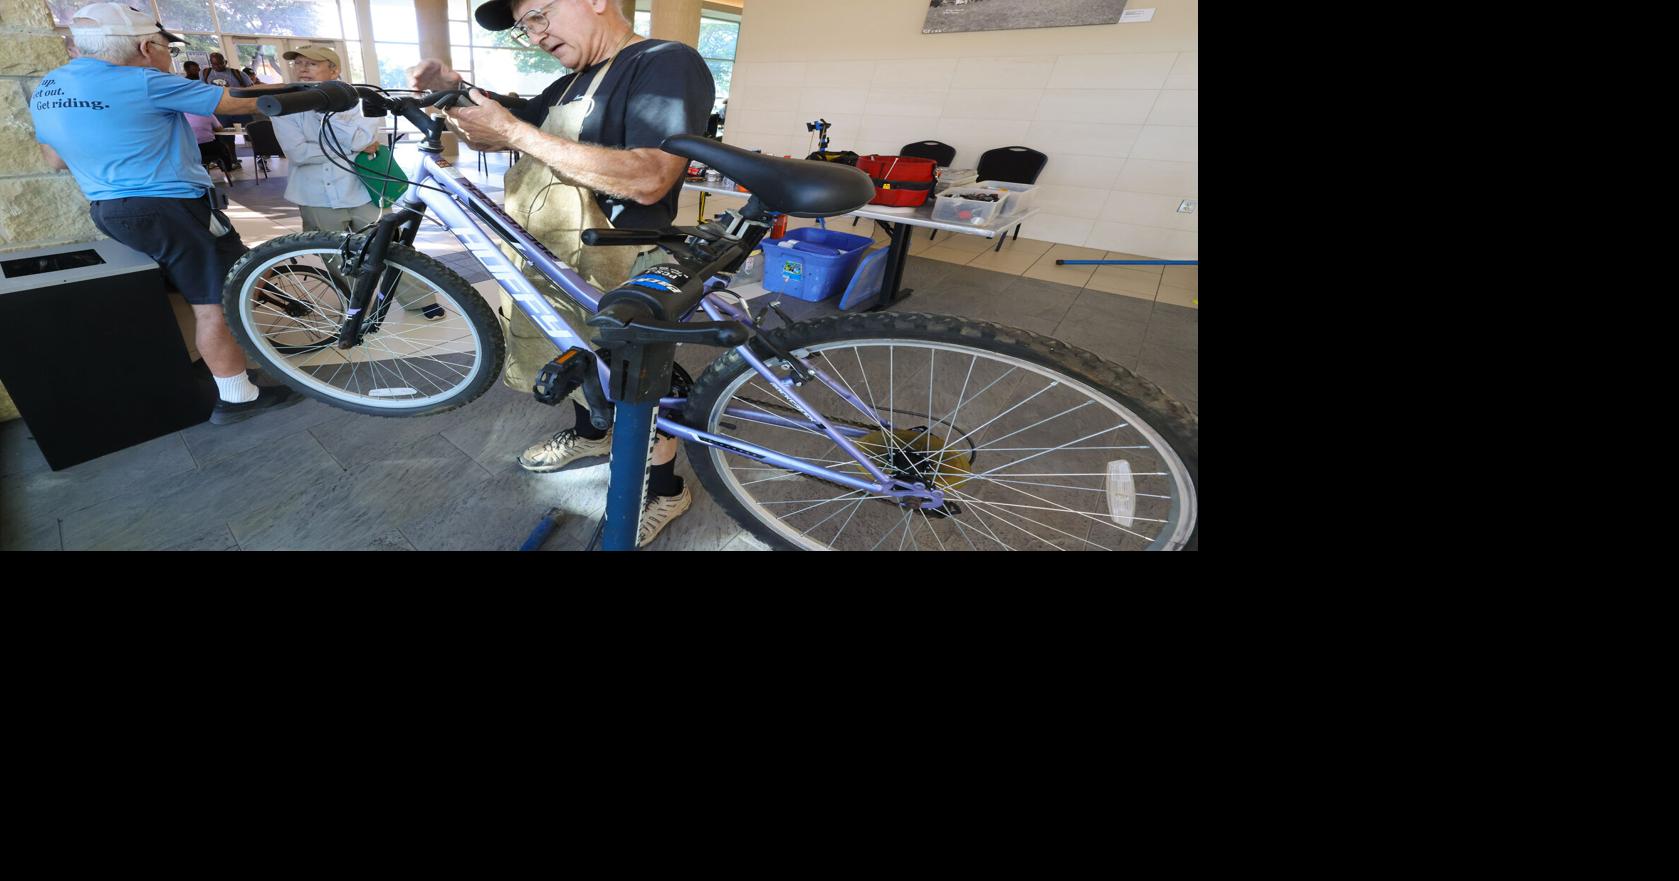 Waco Bicycle Club repairs bicycles for the homeless and the community